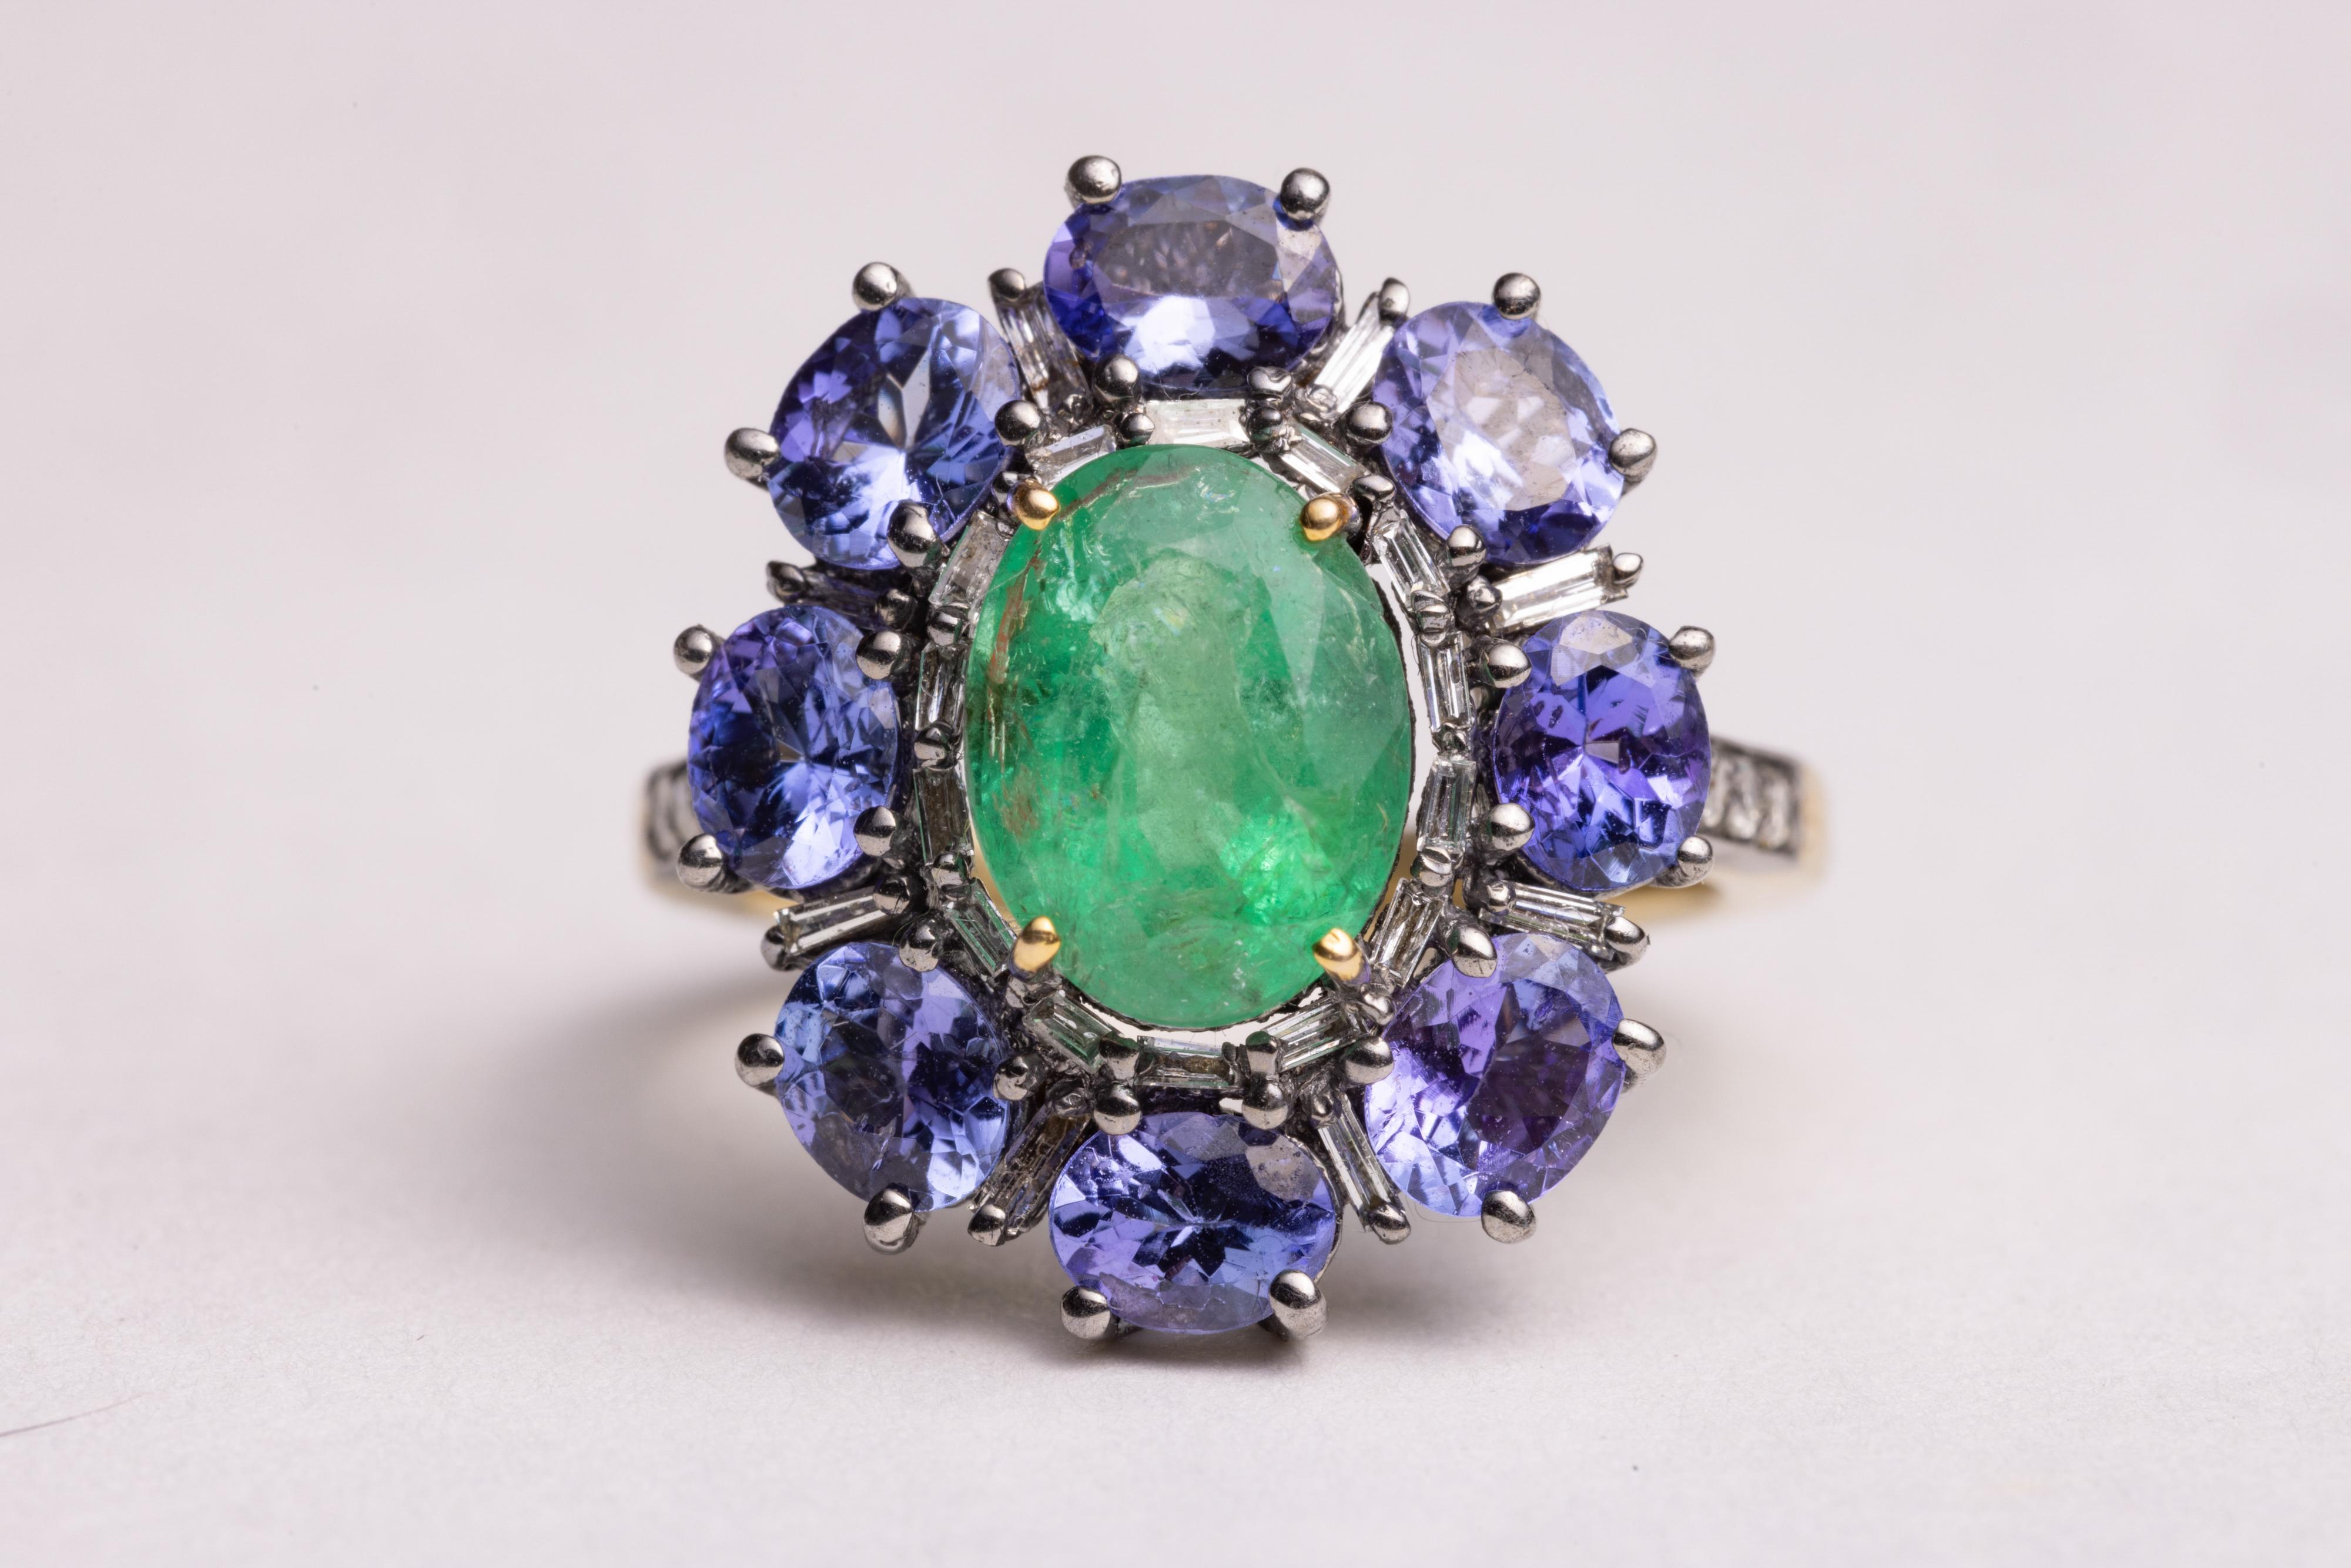 A cocktail ring with a large, oval faceted center emerald surrounded by baguette diamonds and oval faceted tanzanite gemstones.  Round brilliant cut diamonds along the side.  Set in sterling silver and vermeil.  Emerald stone is 2.75 carats, the